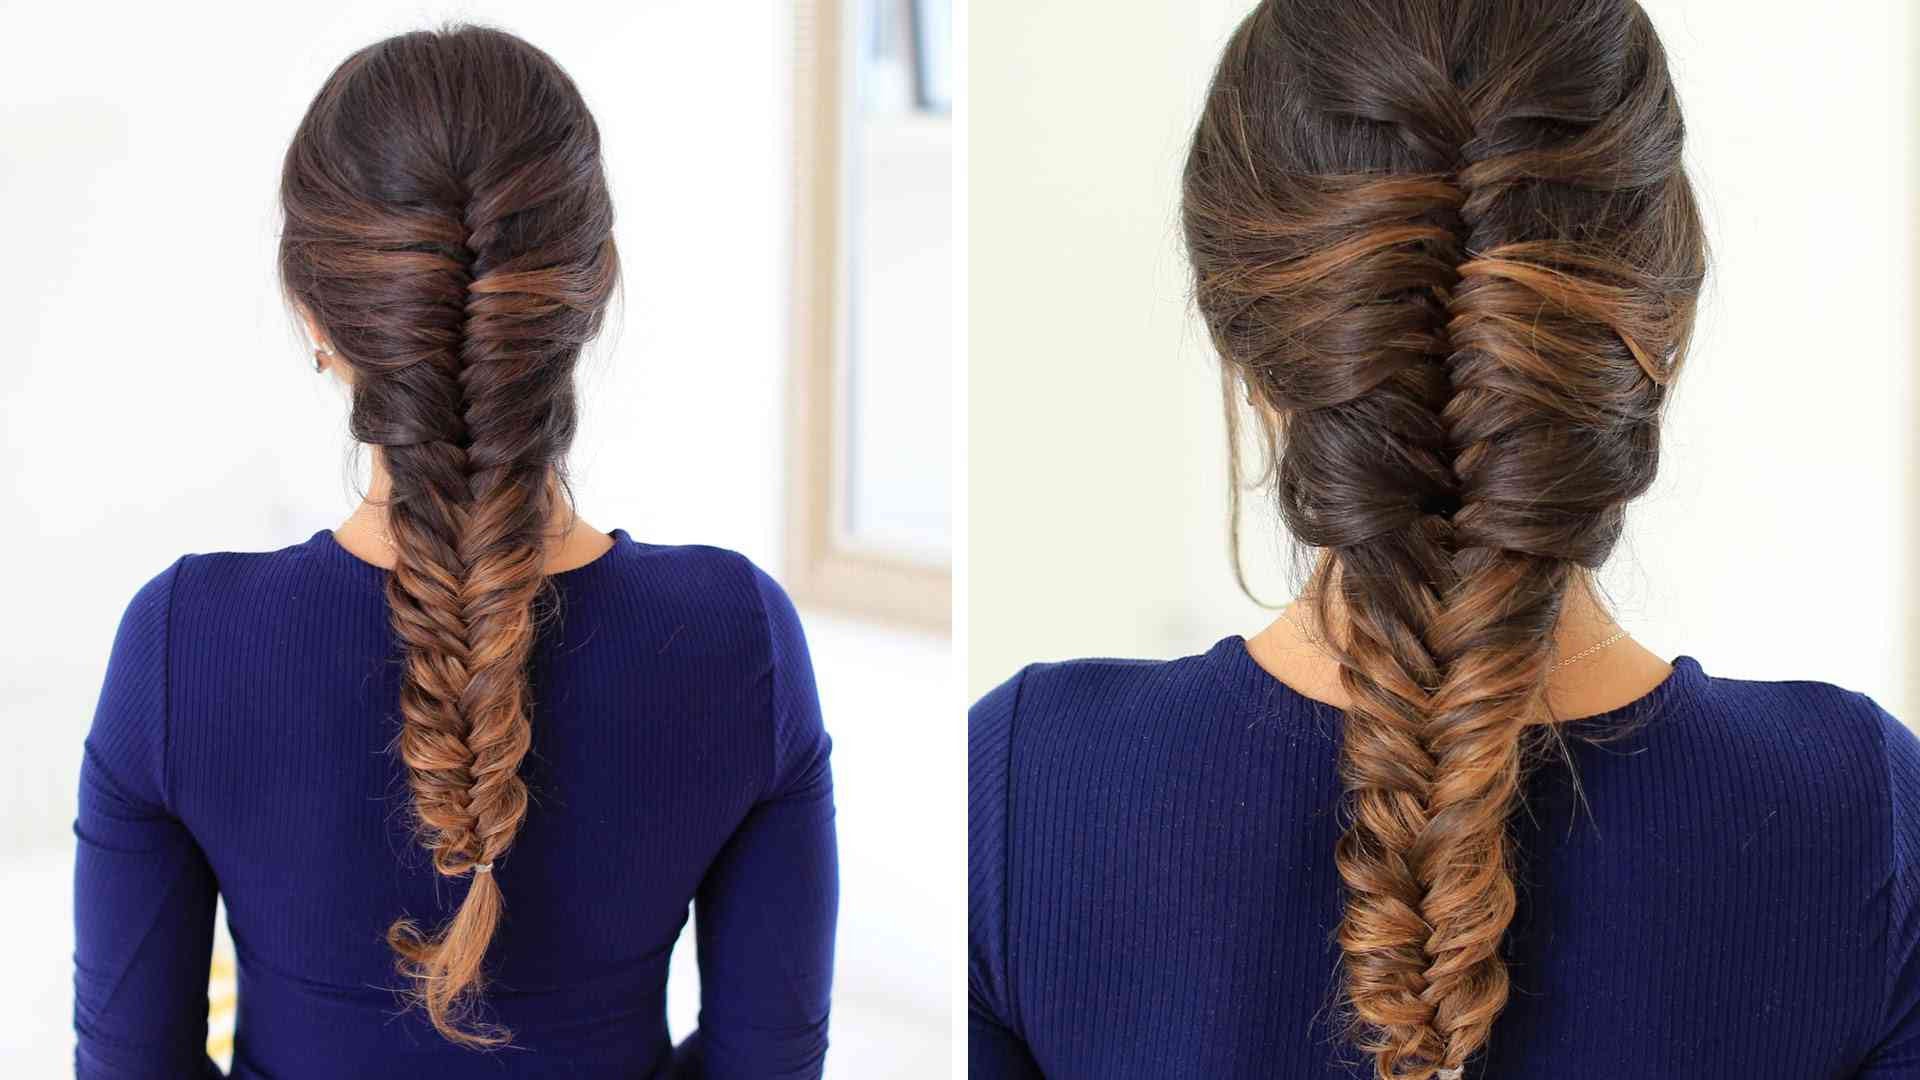 40 Awesome Jazzed Up Fishtail Braid Hairstyles